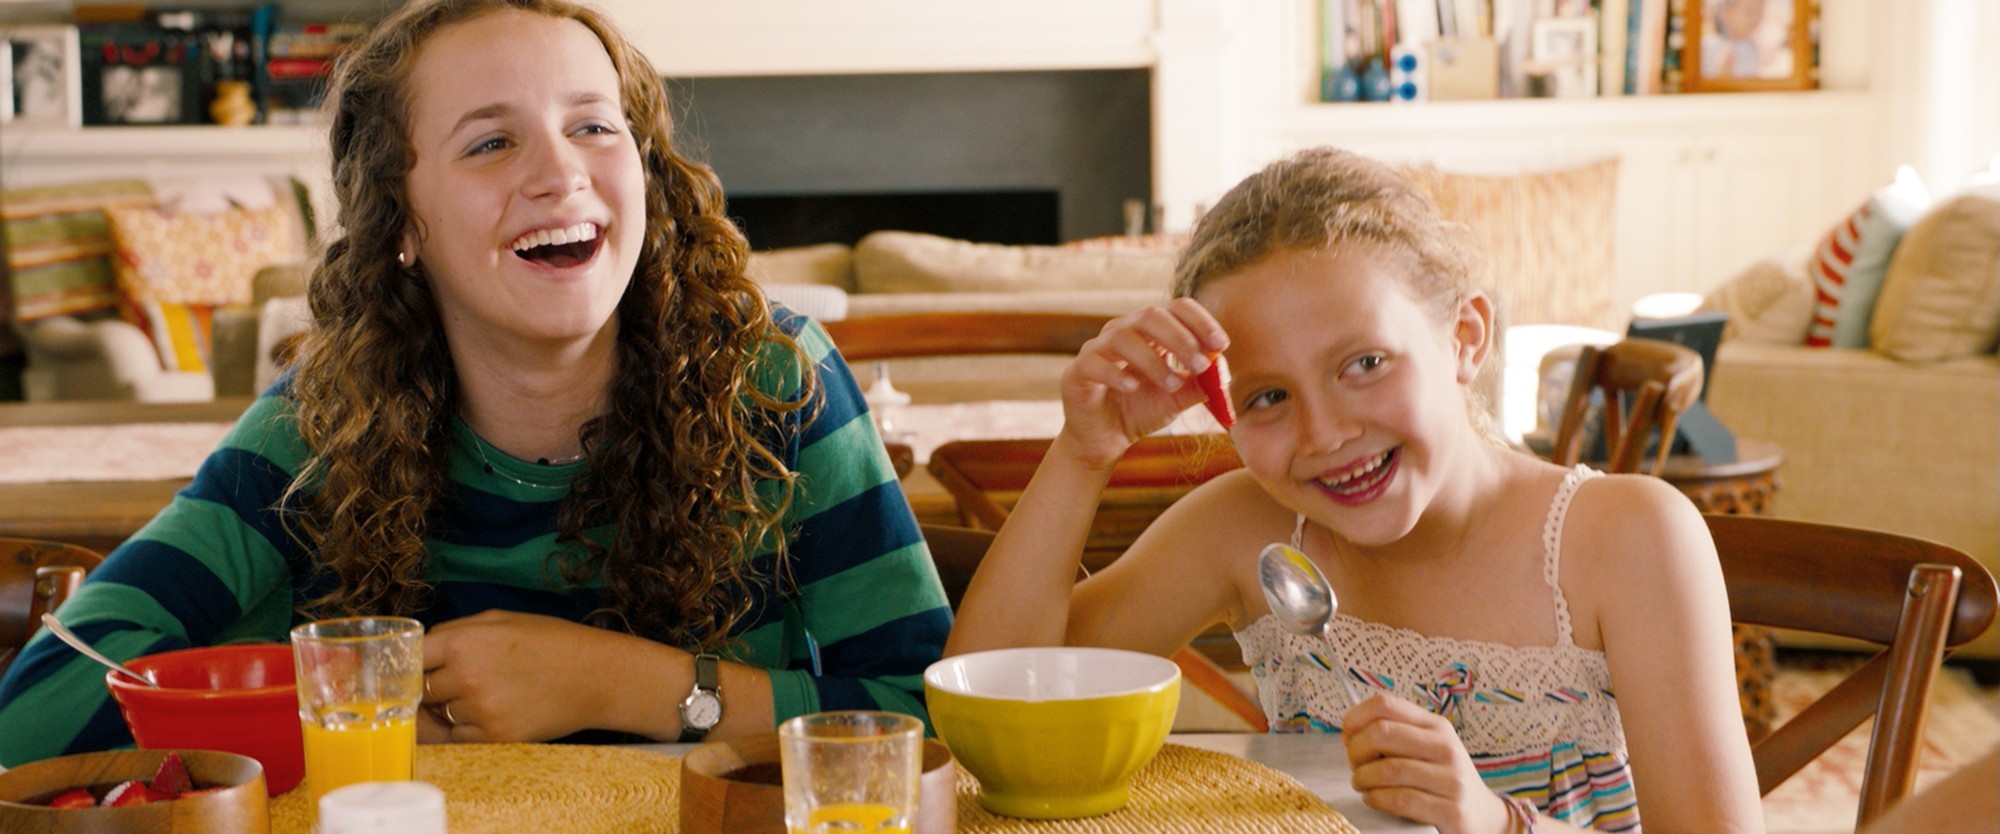 Maude Apatow stars as Saddie and Iris Apatow stars as Charlotte in Universal Pictures' This Is 40 (2012)